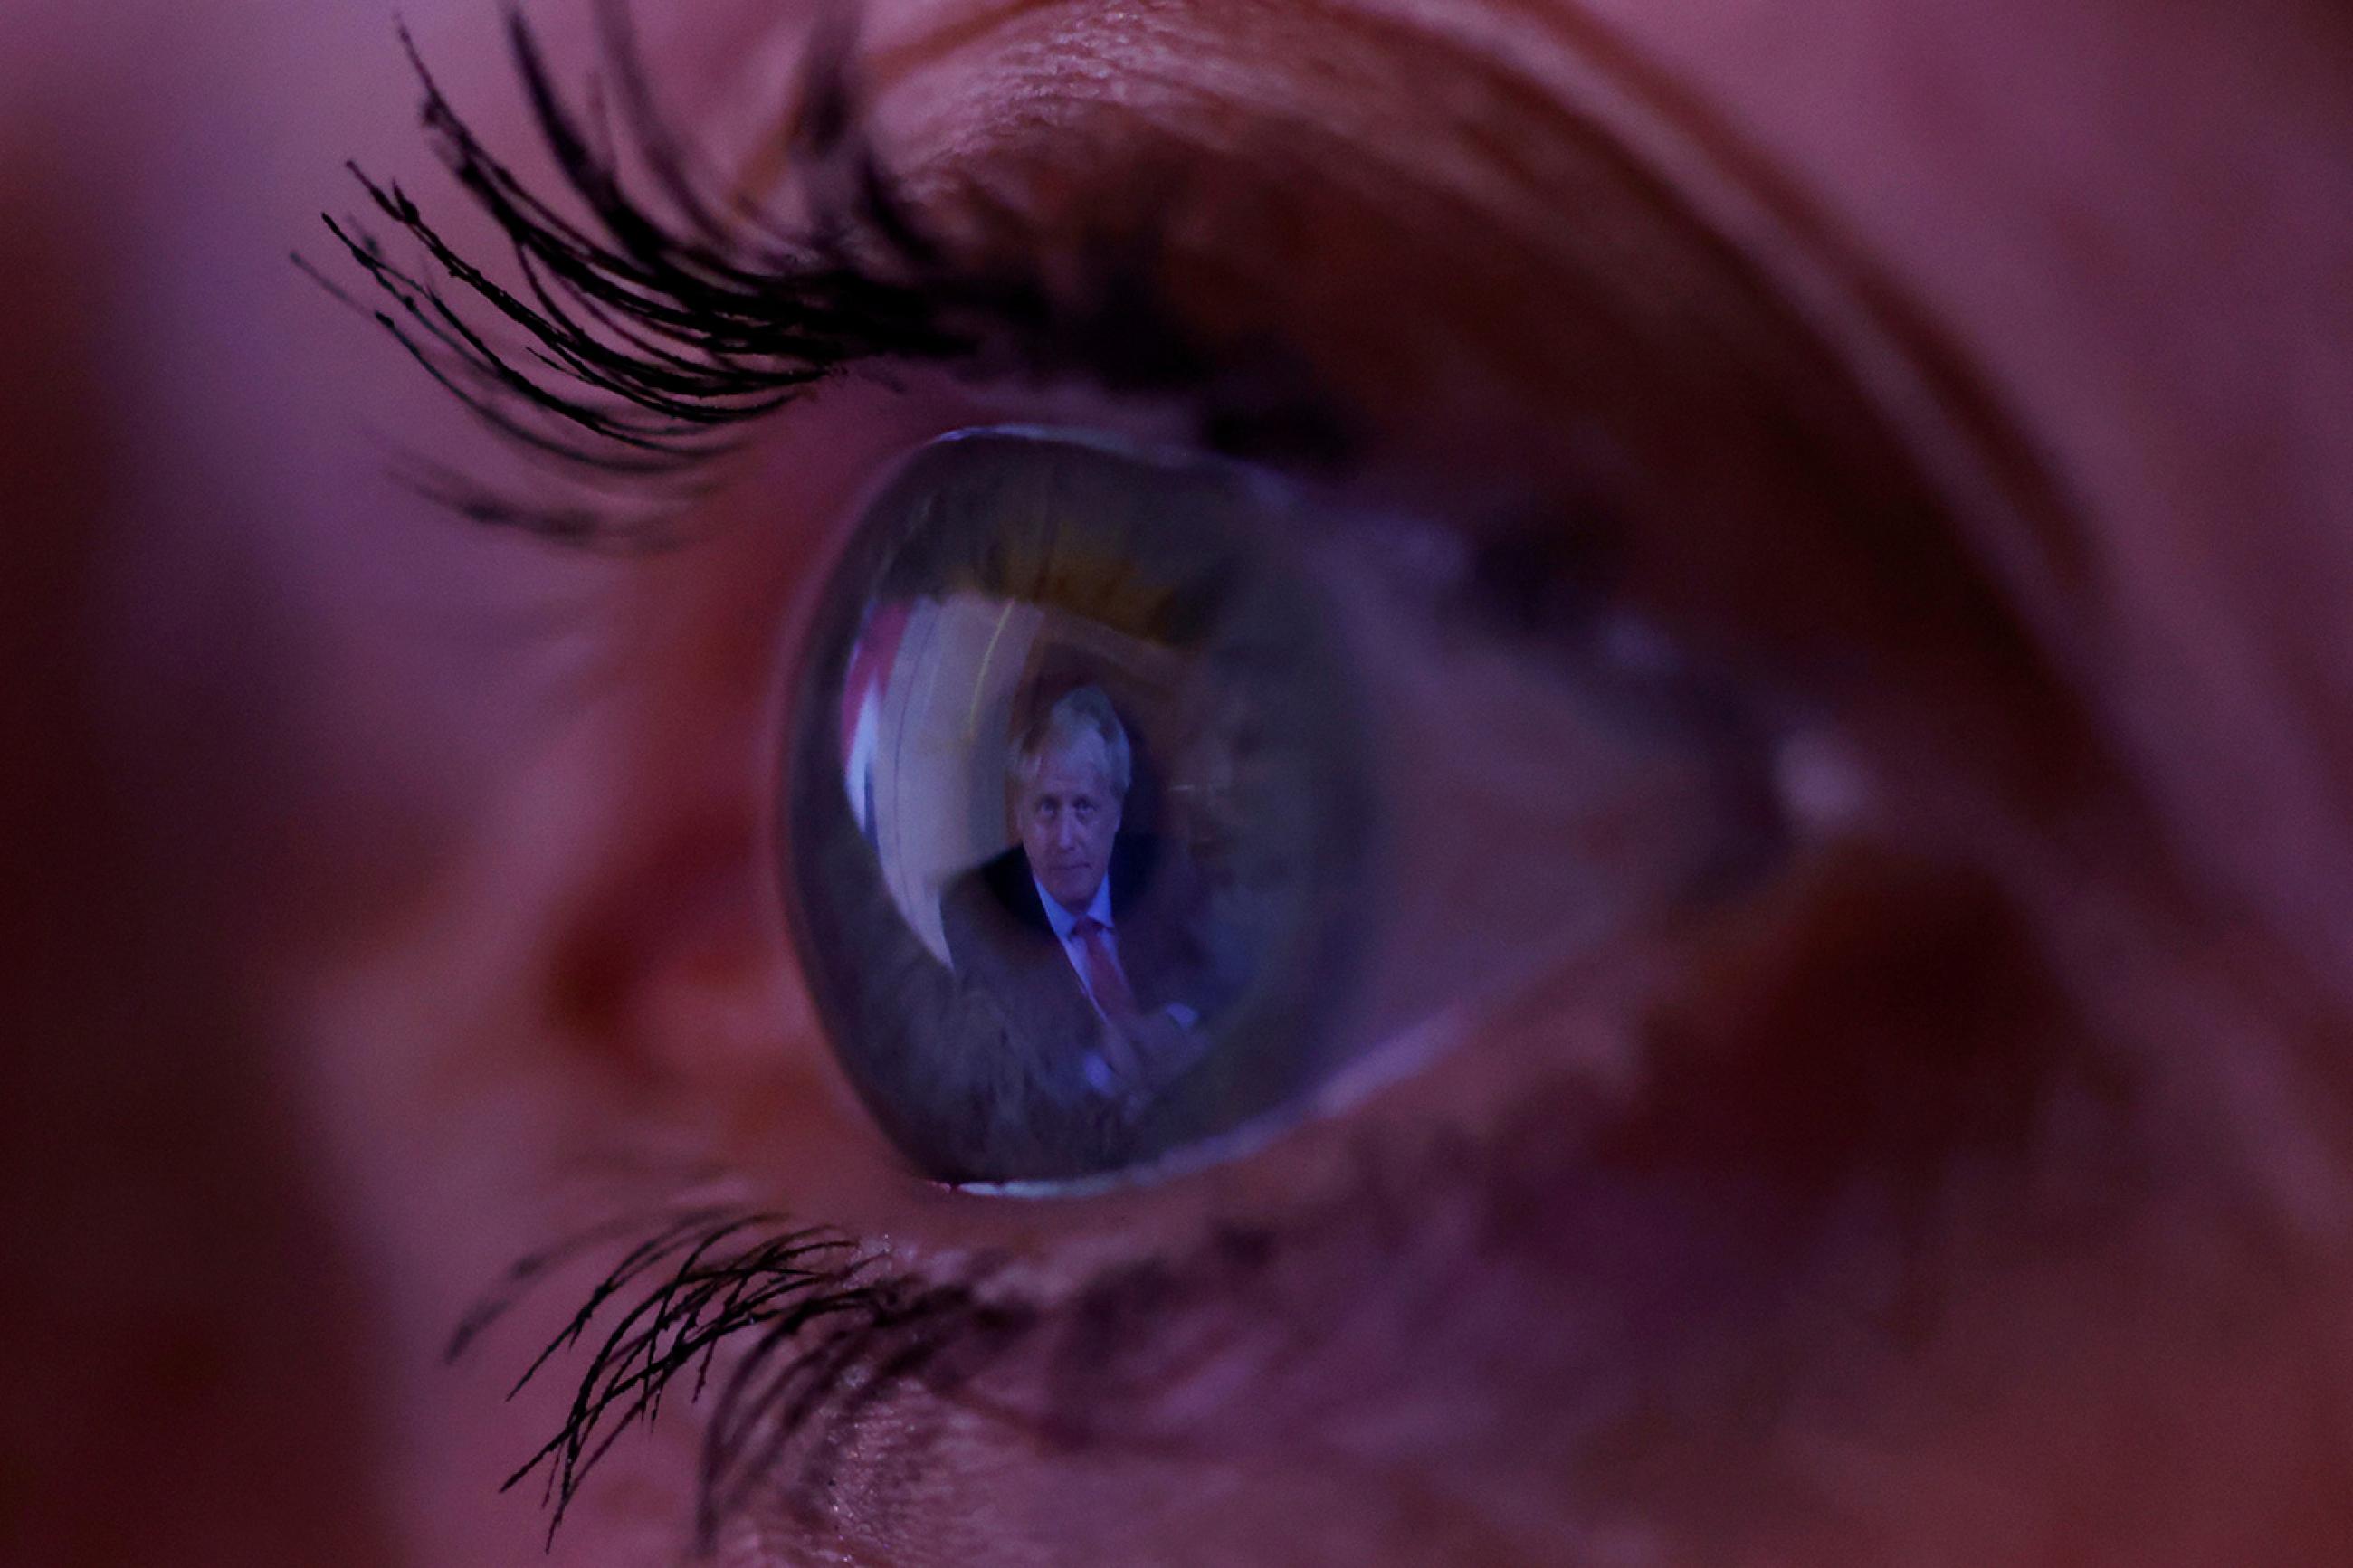 Britain's Prime Minister Boris Johnson is reflected in a woman's eye as she watches his address to the nation following the outbreak of coronavirus in Manchester, England, on September 22, 2020. The photo shows a macro lens image of an eye with the image of the PM reflected in it. REUTERS/Phil Noble